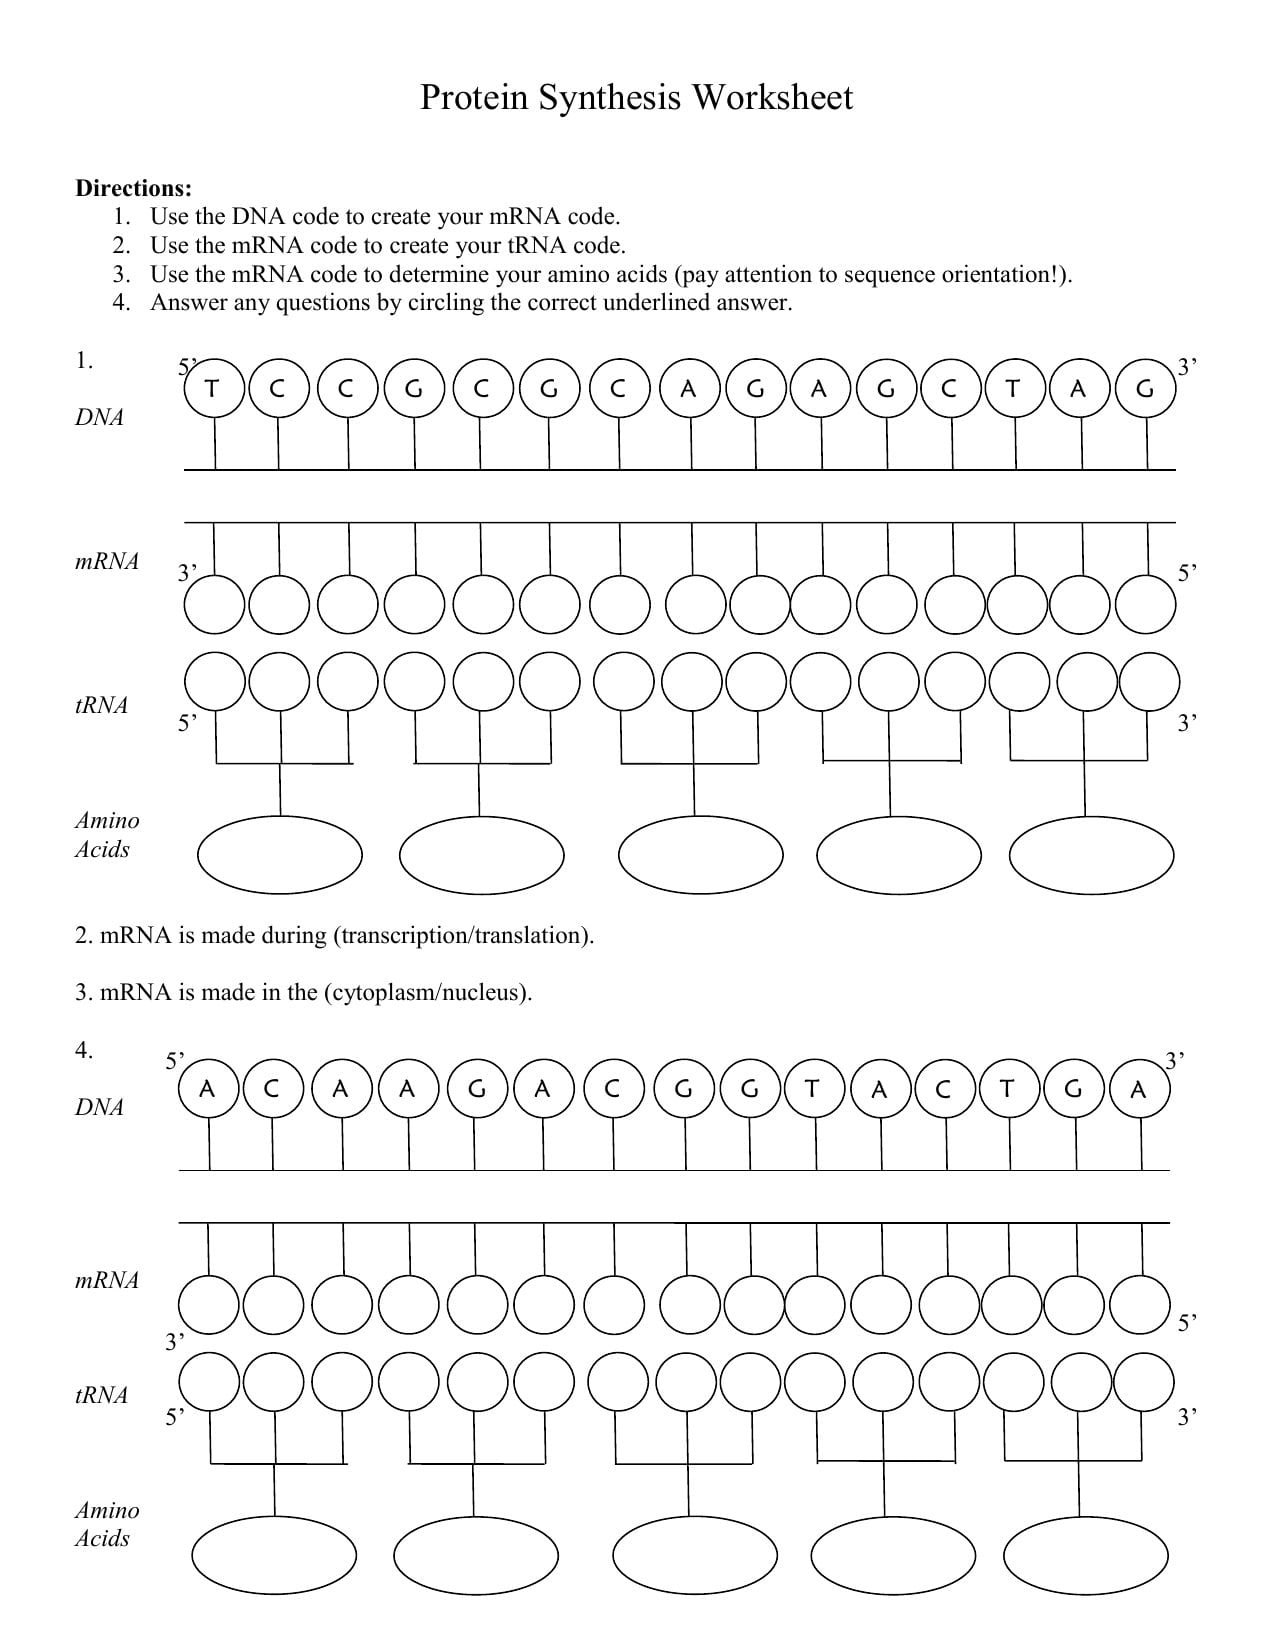 Protein Synthesis Worksheet For Protein Synthesis And Amino Acid Worksheet